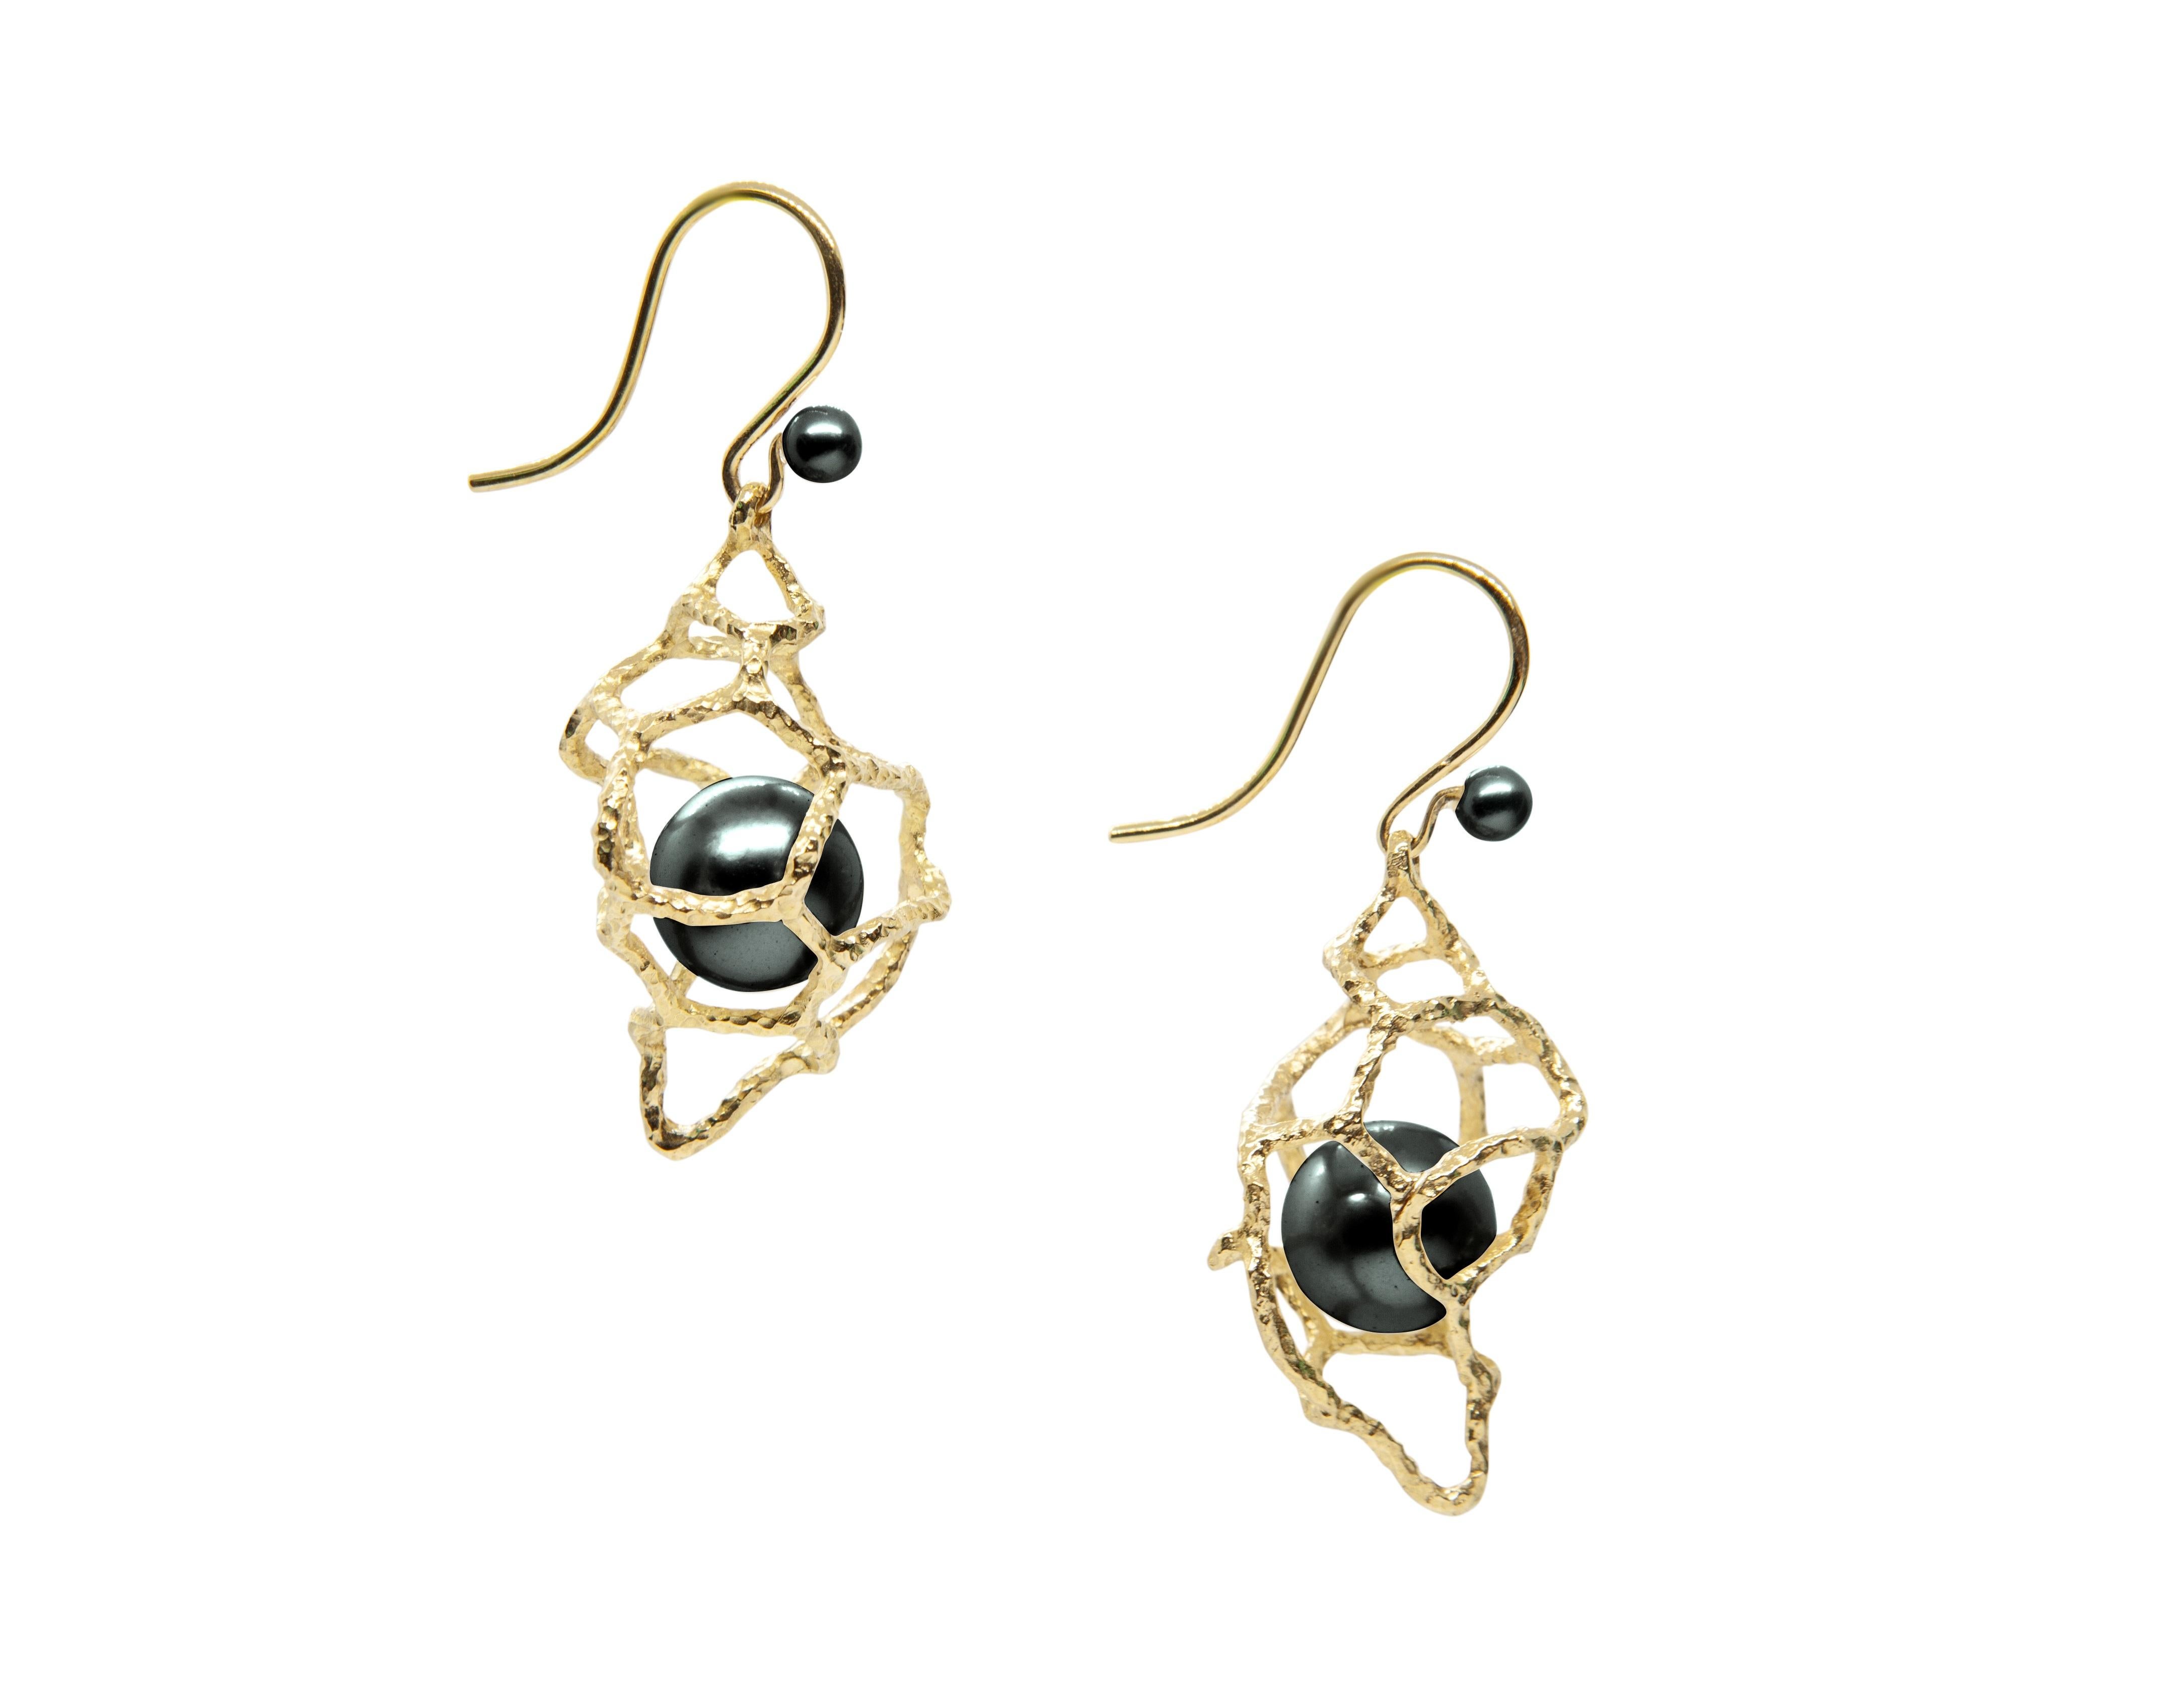 This pair of earrings are from Lingjun's 'FISSURE' collection, inspired by the conch shell in the sea, embracing the fine round black Tahitian pearls, celebrating the vibrant life of our oceans.

The organic lines of gold were hand carved to mimic